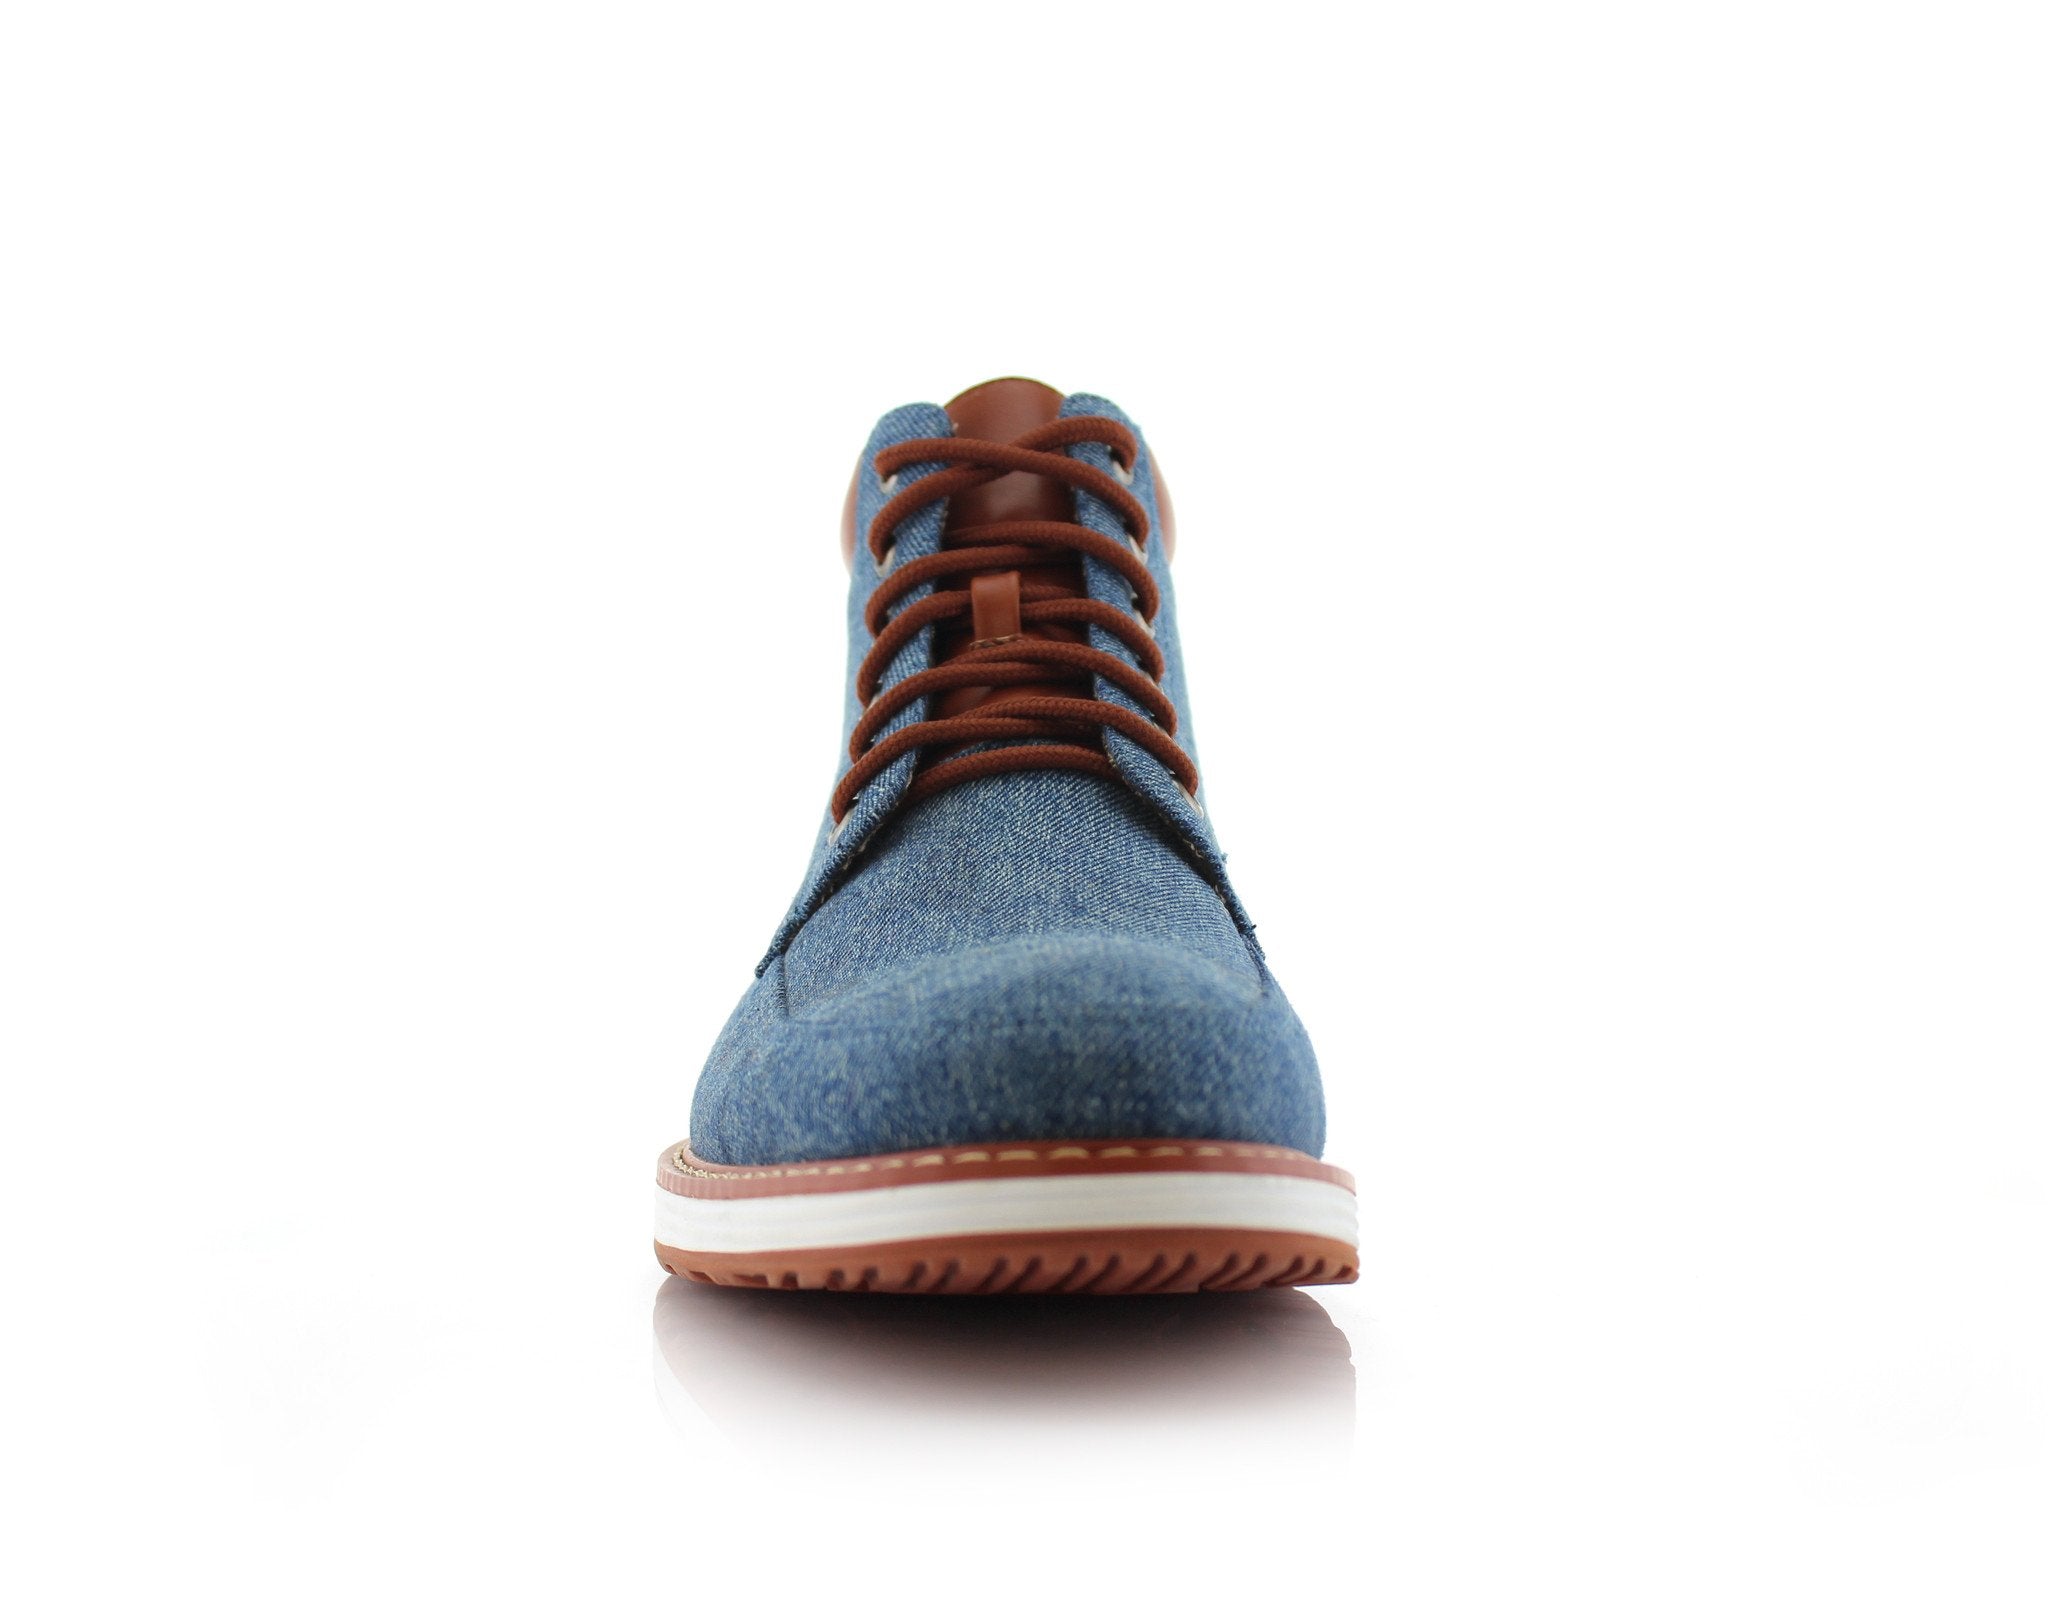 Two-Toned Sneaker Boots | Melvin by Ferro Aldo | Conal Footwear | Front Angle View